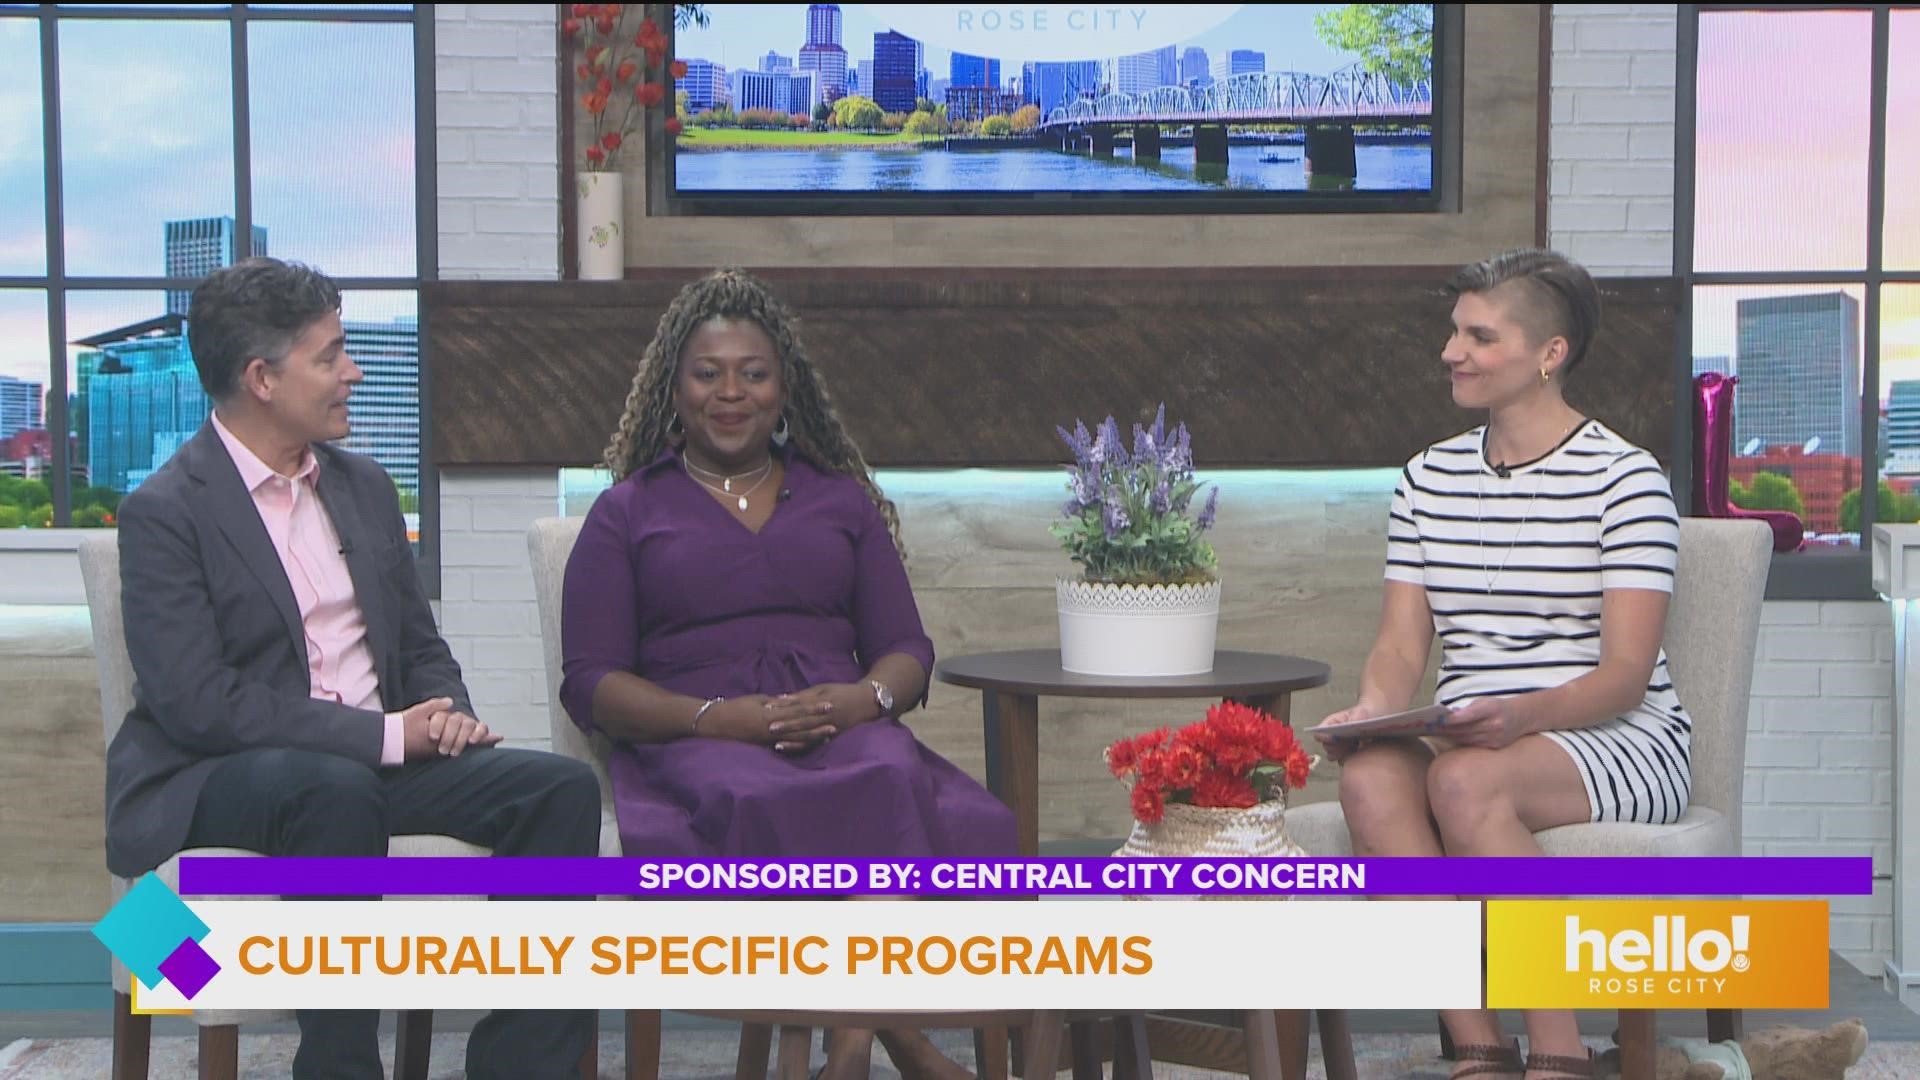 Dr. Andy Mendenhall and Tori Hatter-Smith with Central City Concern talk about the Karibu program